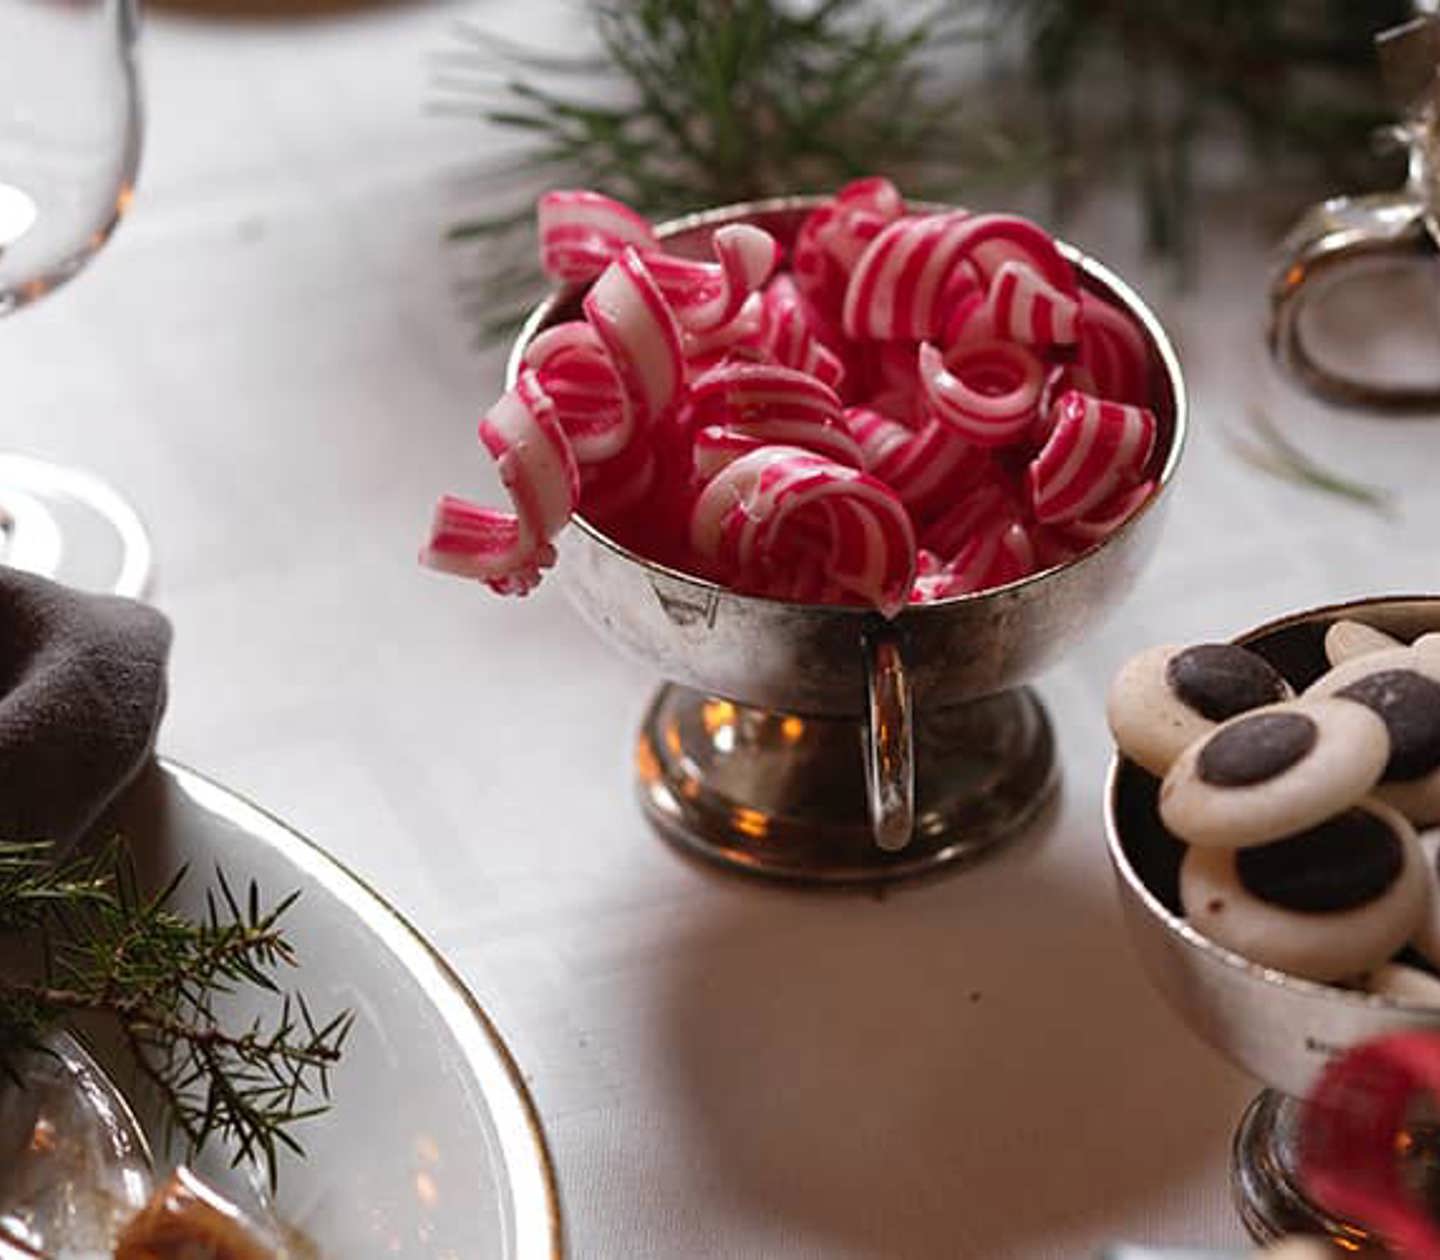 Different types of sweets on the Christmas table